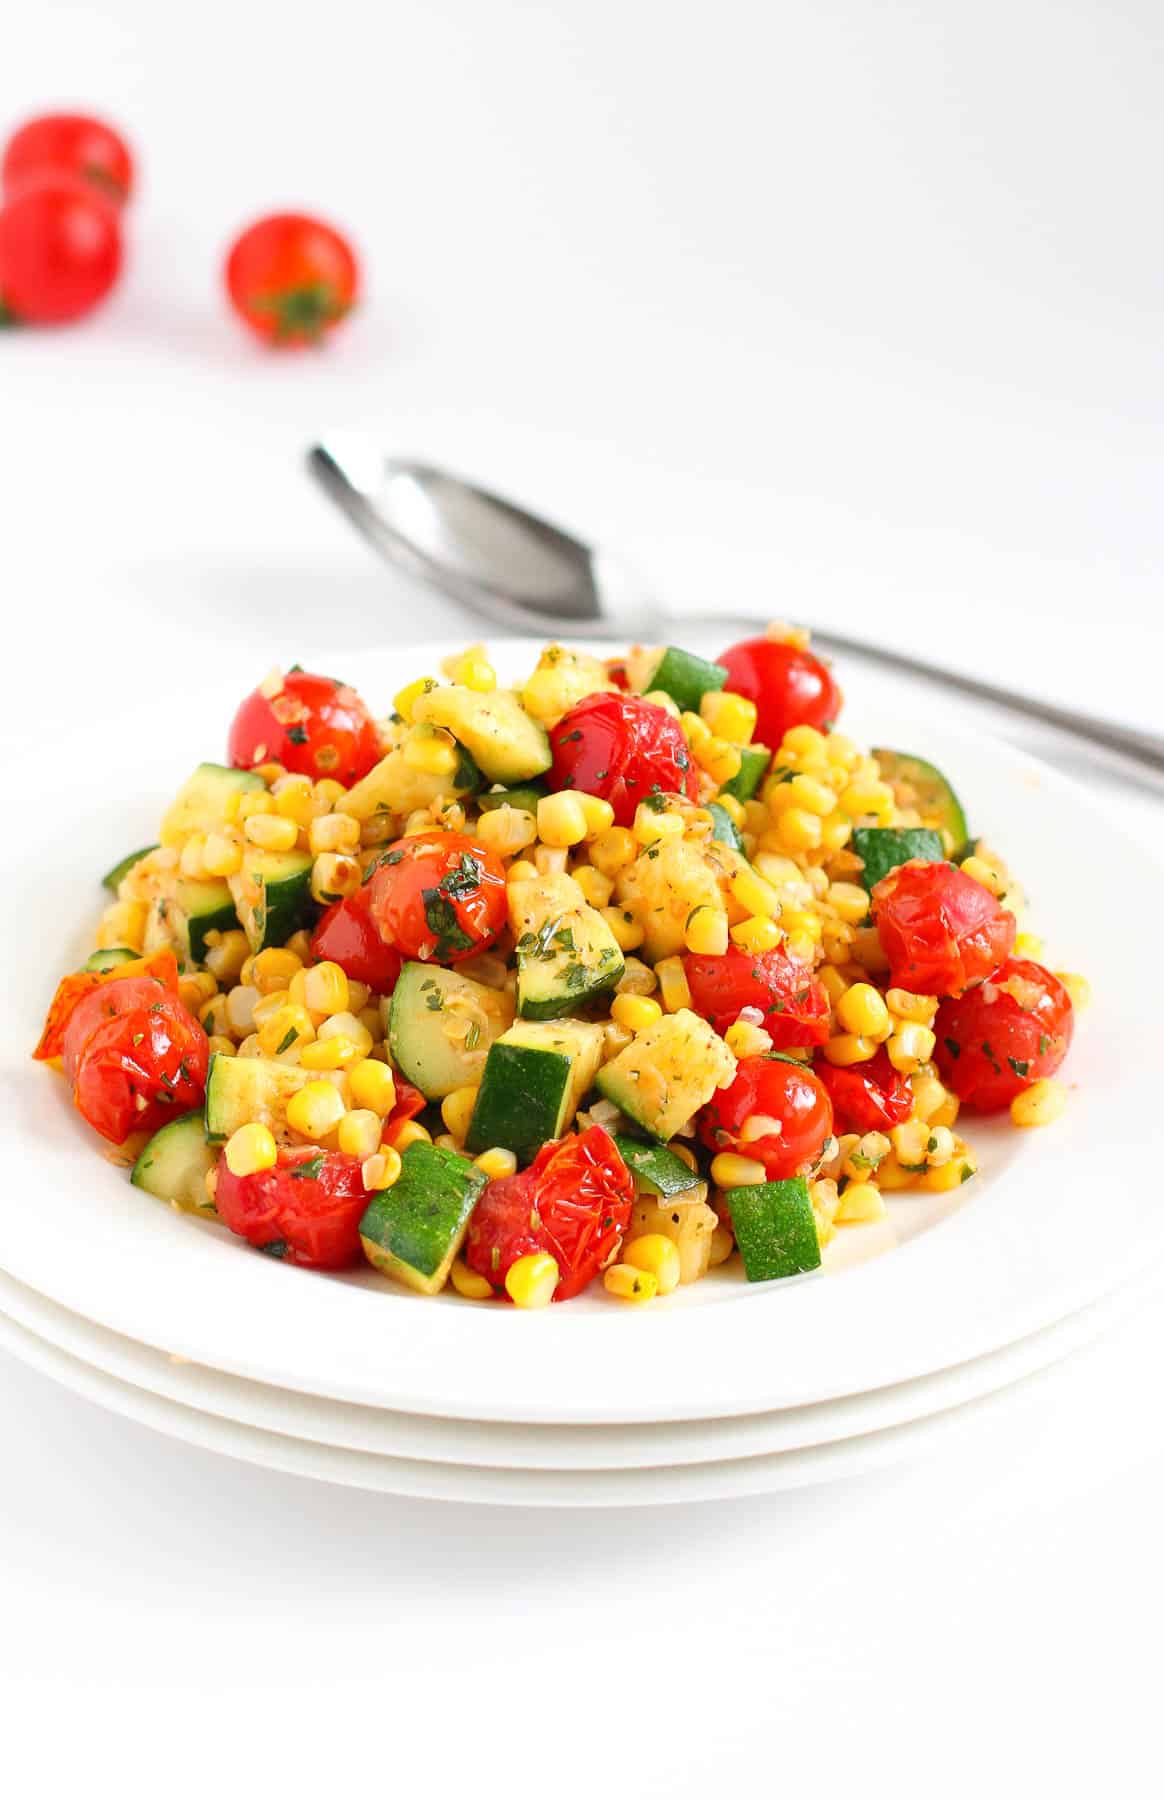 This easy side dish is bursting with summertime flavors! Sautéed corn and zucchini mix with blistered tomatoes, lime juice, garlic and herbs. Simple and delicious! | Recipes | Side dishes | Vegan | Plant based